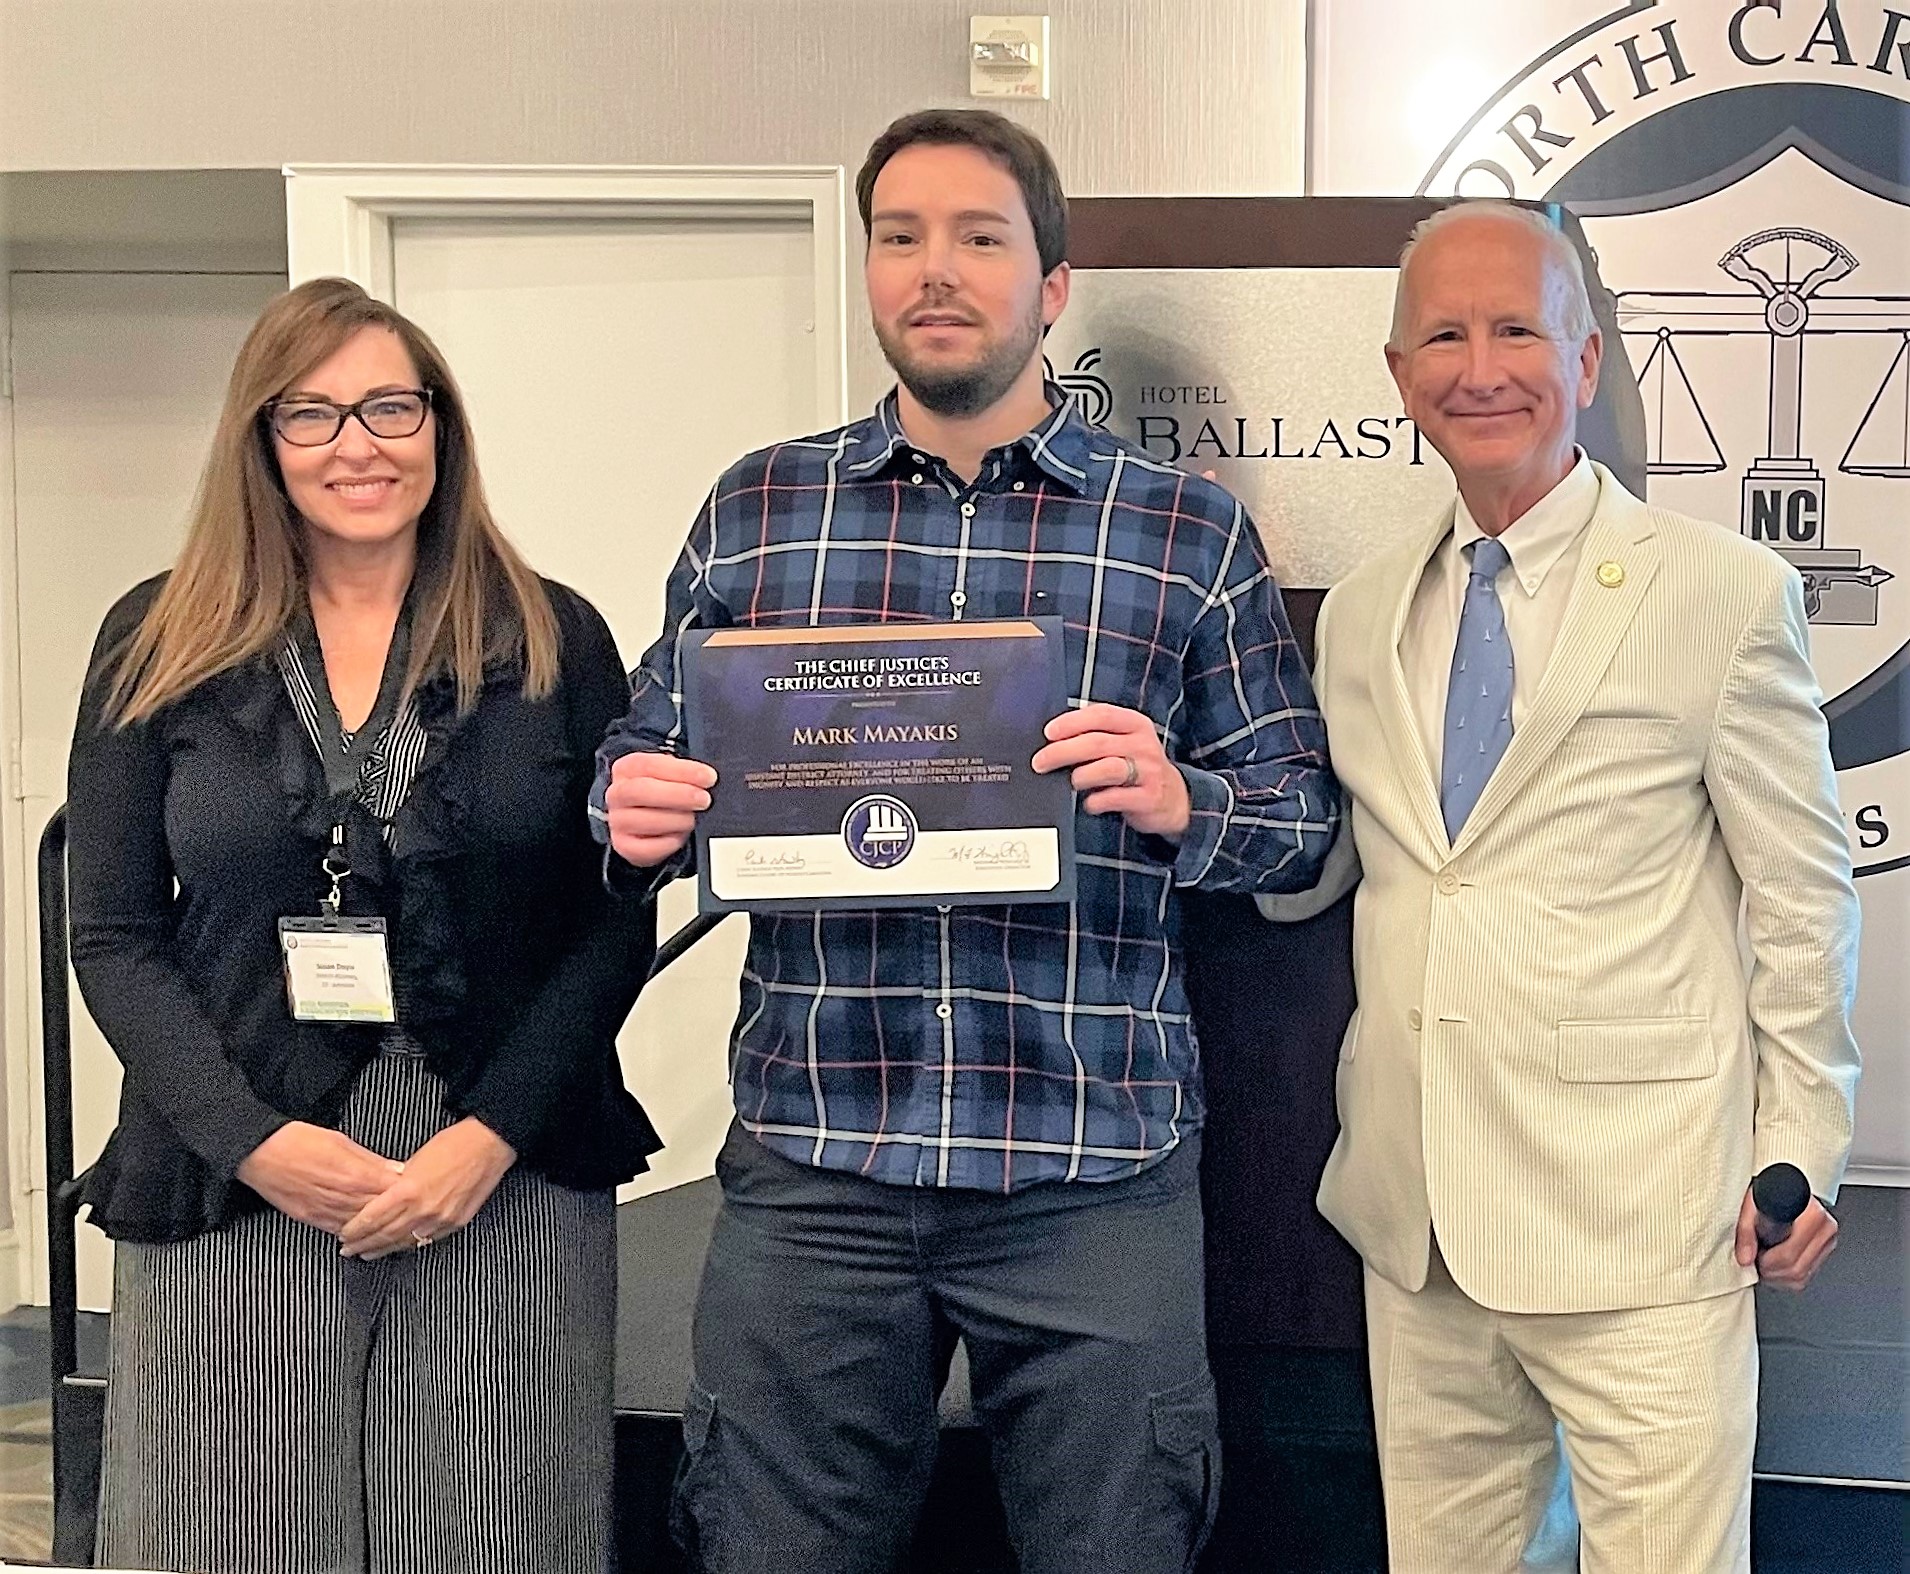 Mark Mayakis (center) receives the Chief Justice's Certificate of Excellence Award